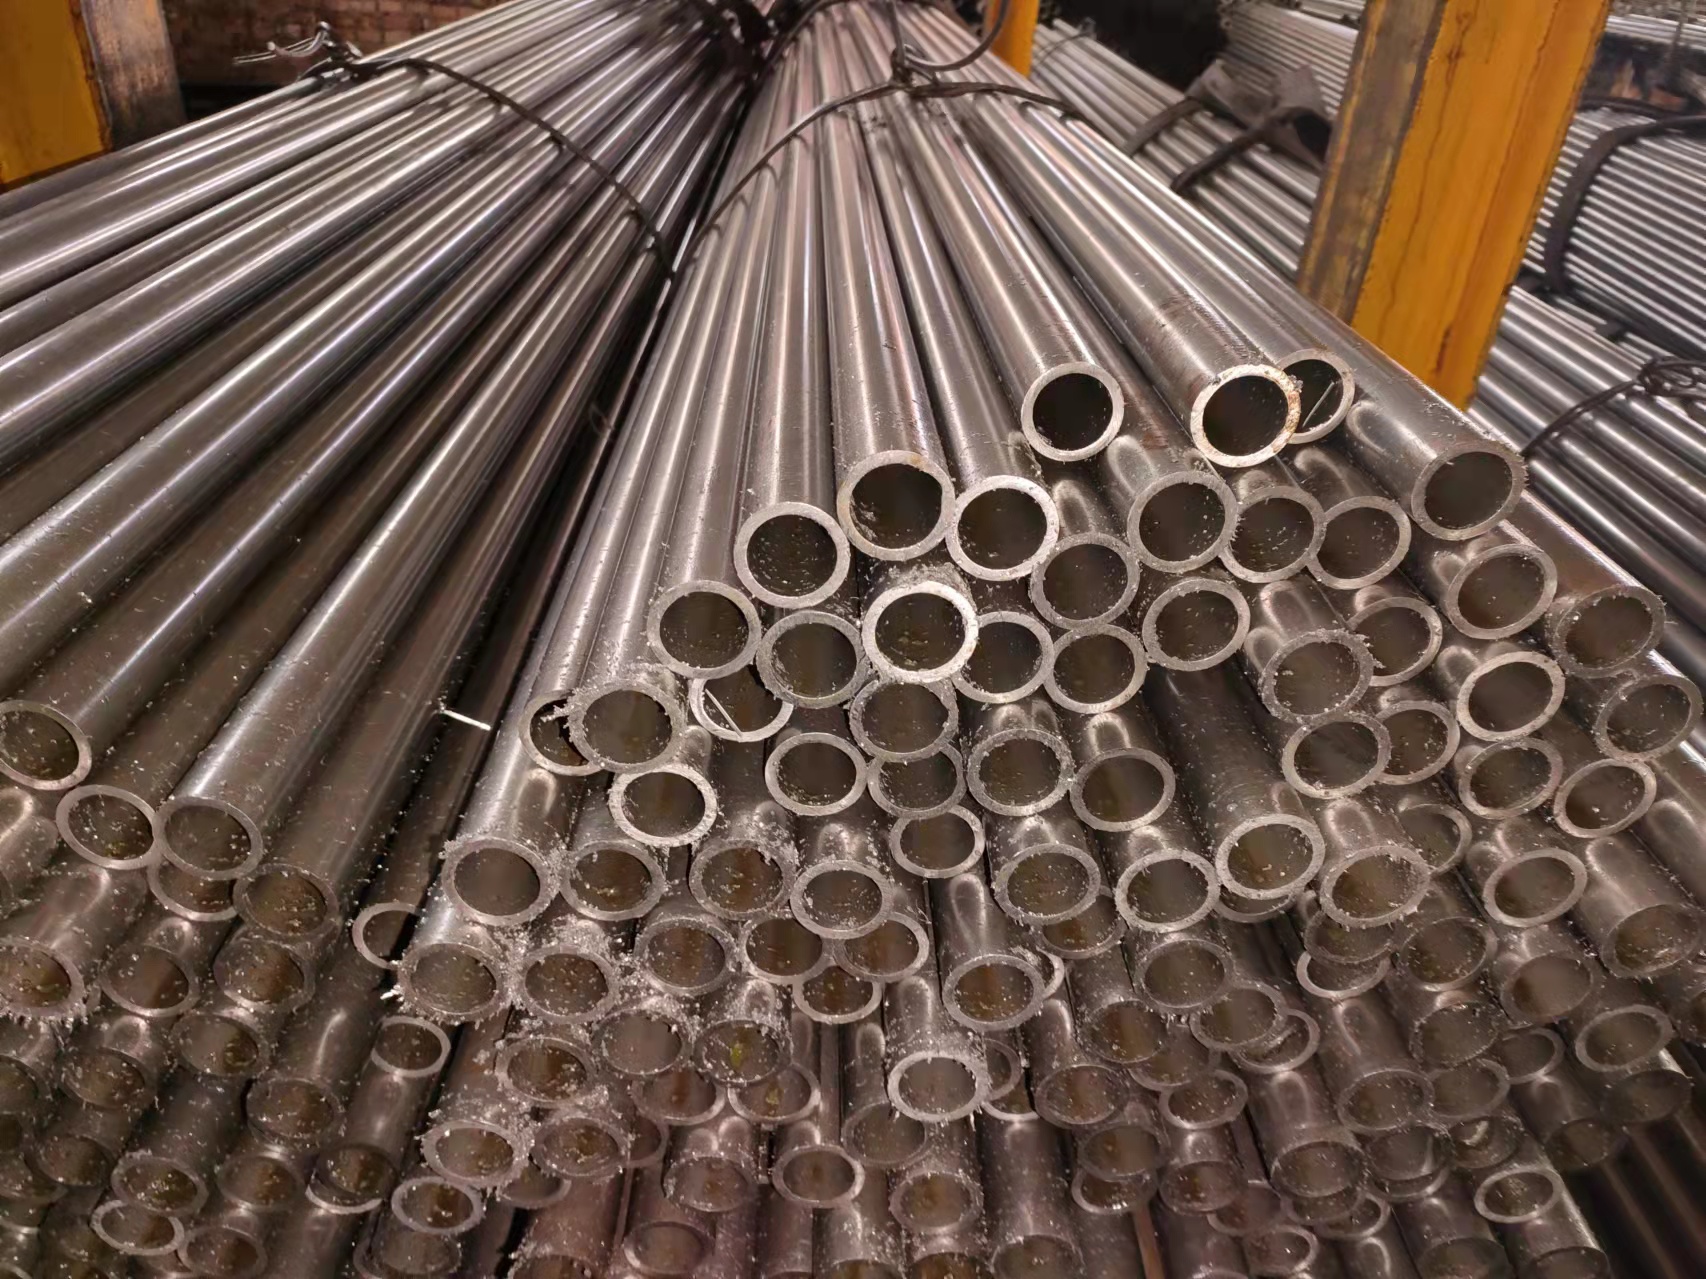 Hot Sale Carbon Steel Seamless Steel Pipe for Construction Seamless Round Steel Pipe Seamless Pipe with Good Price